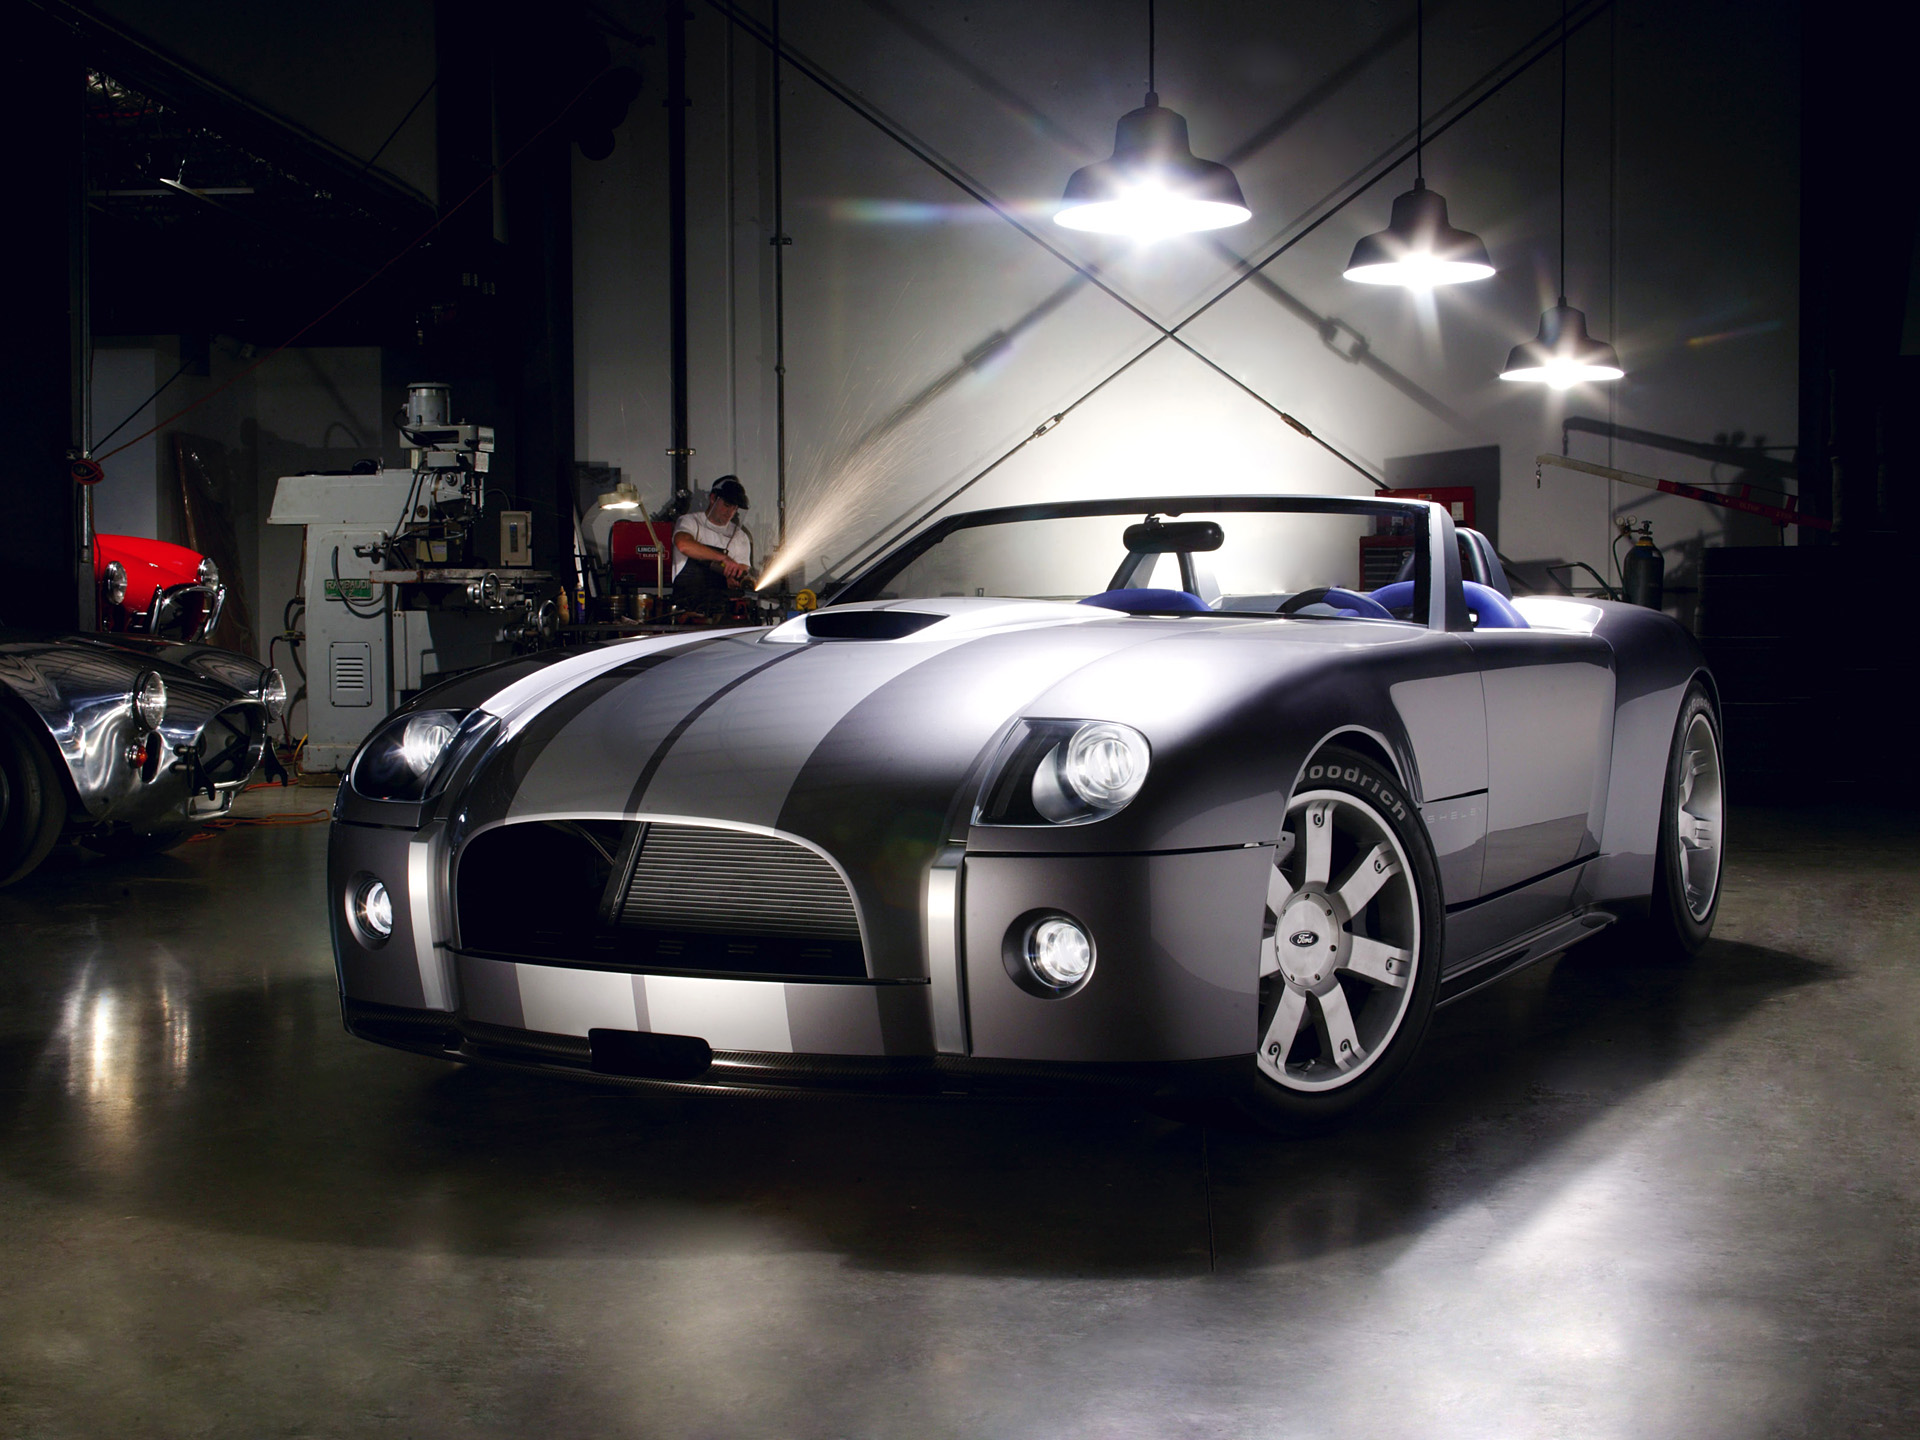 Mustang Of The Day: 2005 Ford Shelby Cobra Concept